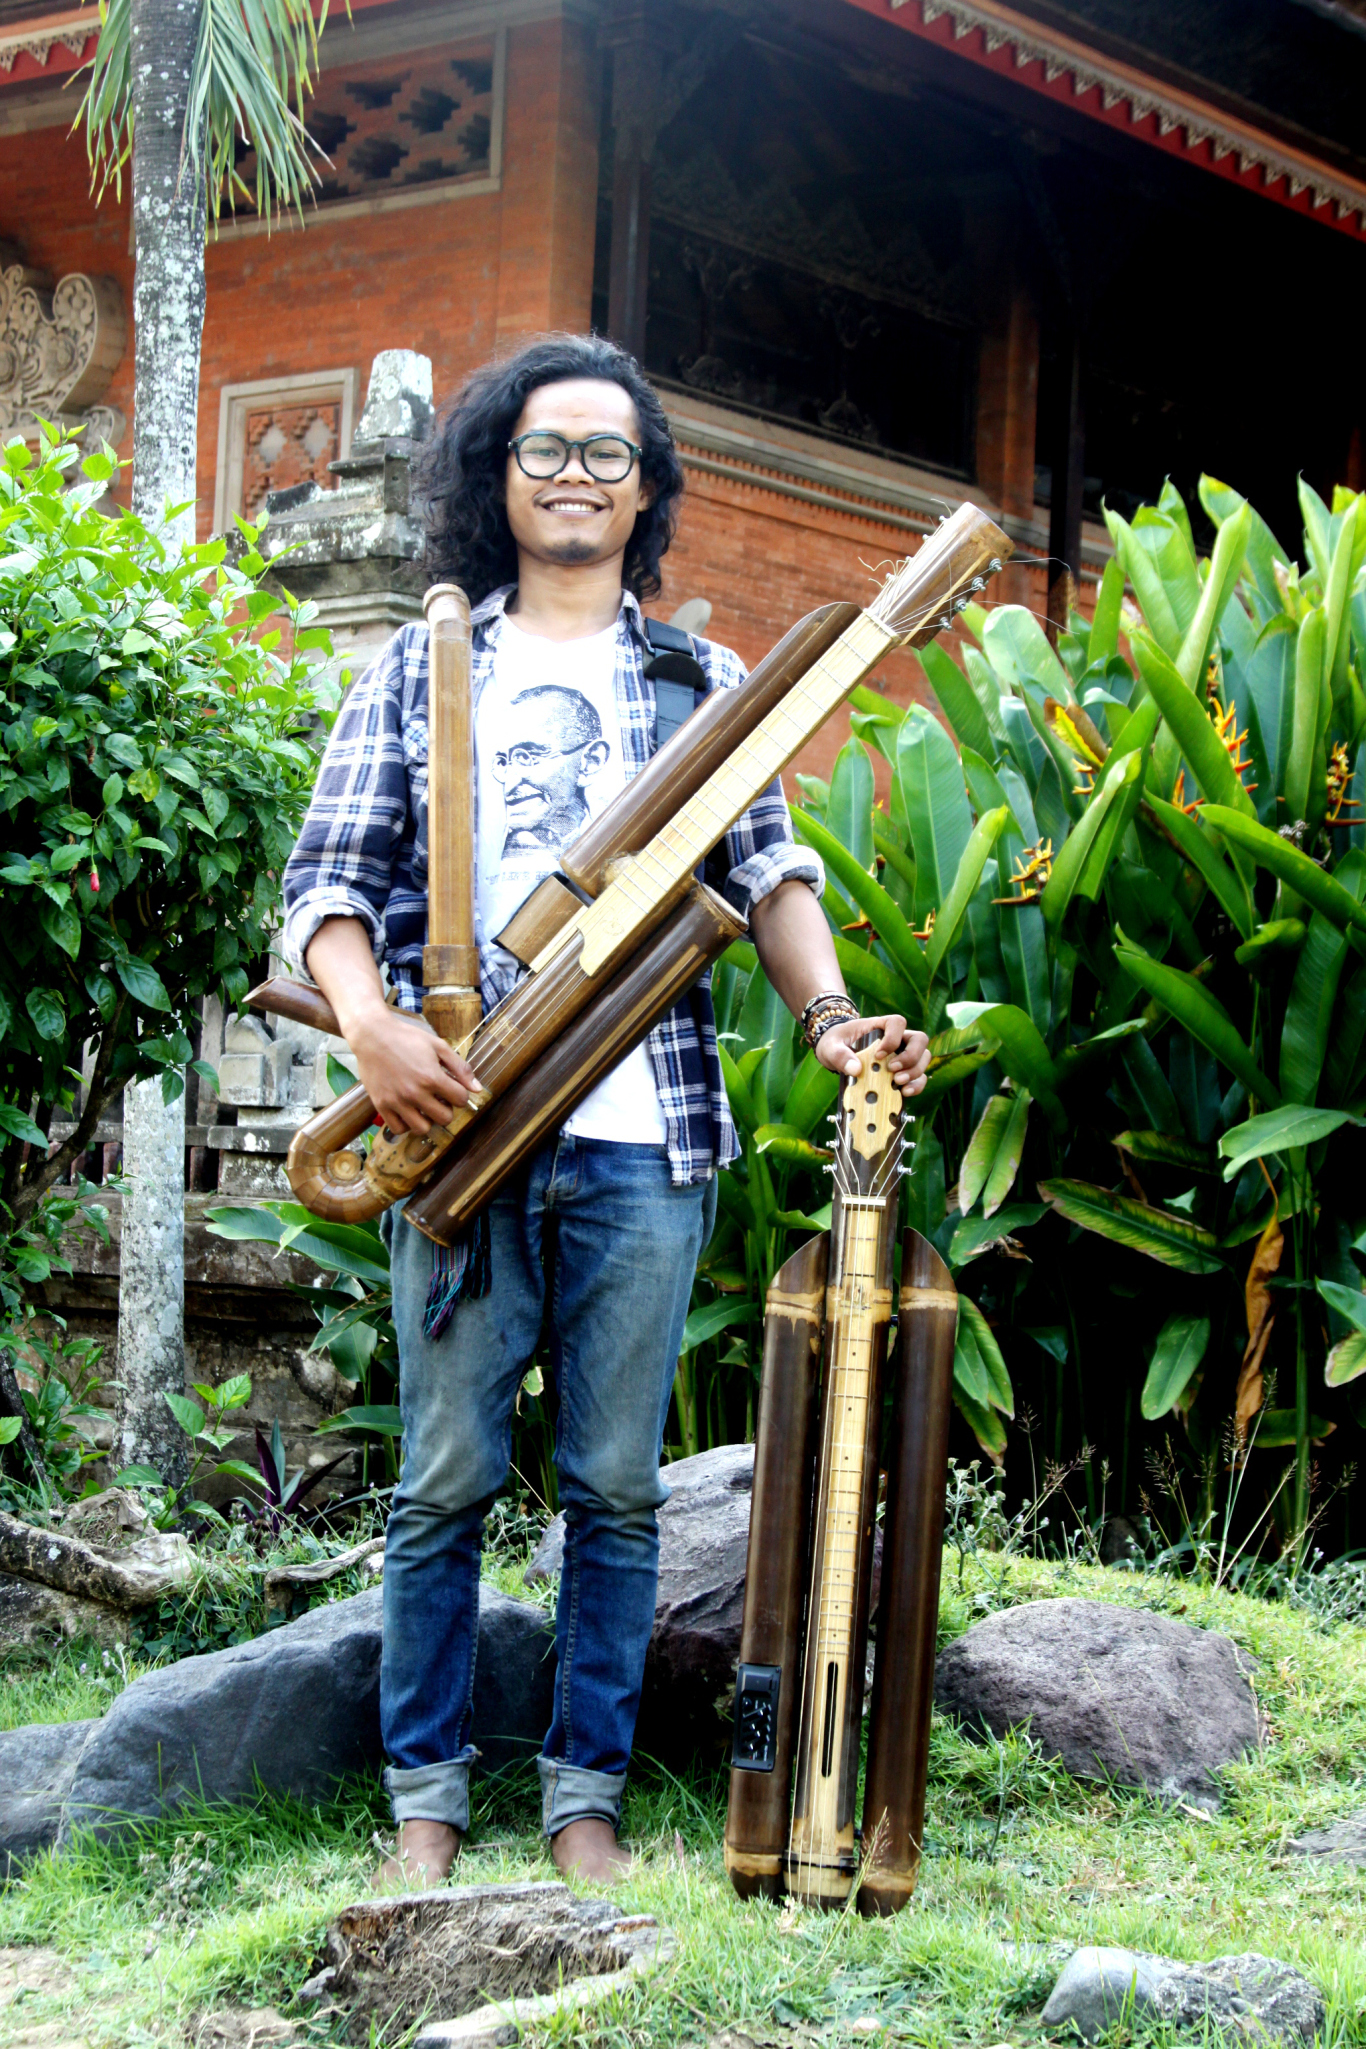 Rizal pictured here with a Rasendriya and a bamboo lap steel guitar, and wearing spectacle frames he fashioned himself from, you guessed it, bamboo!